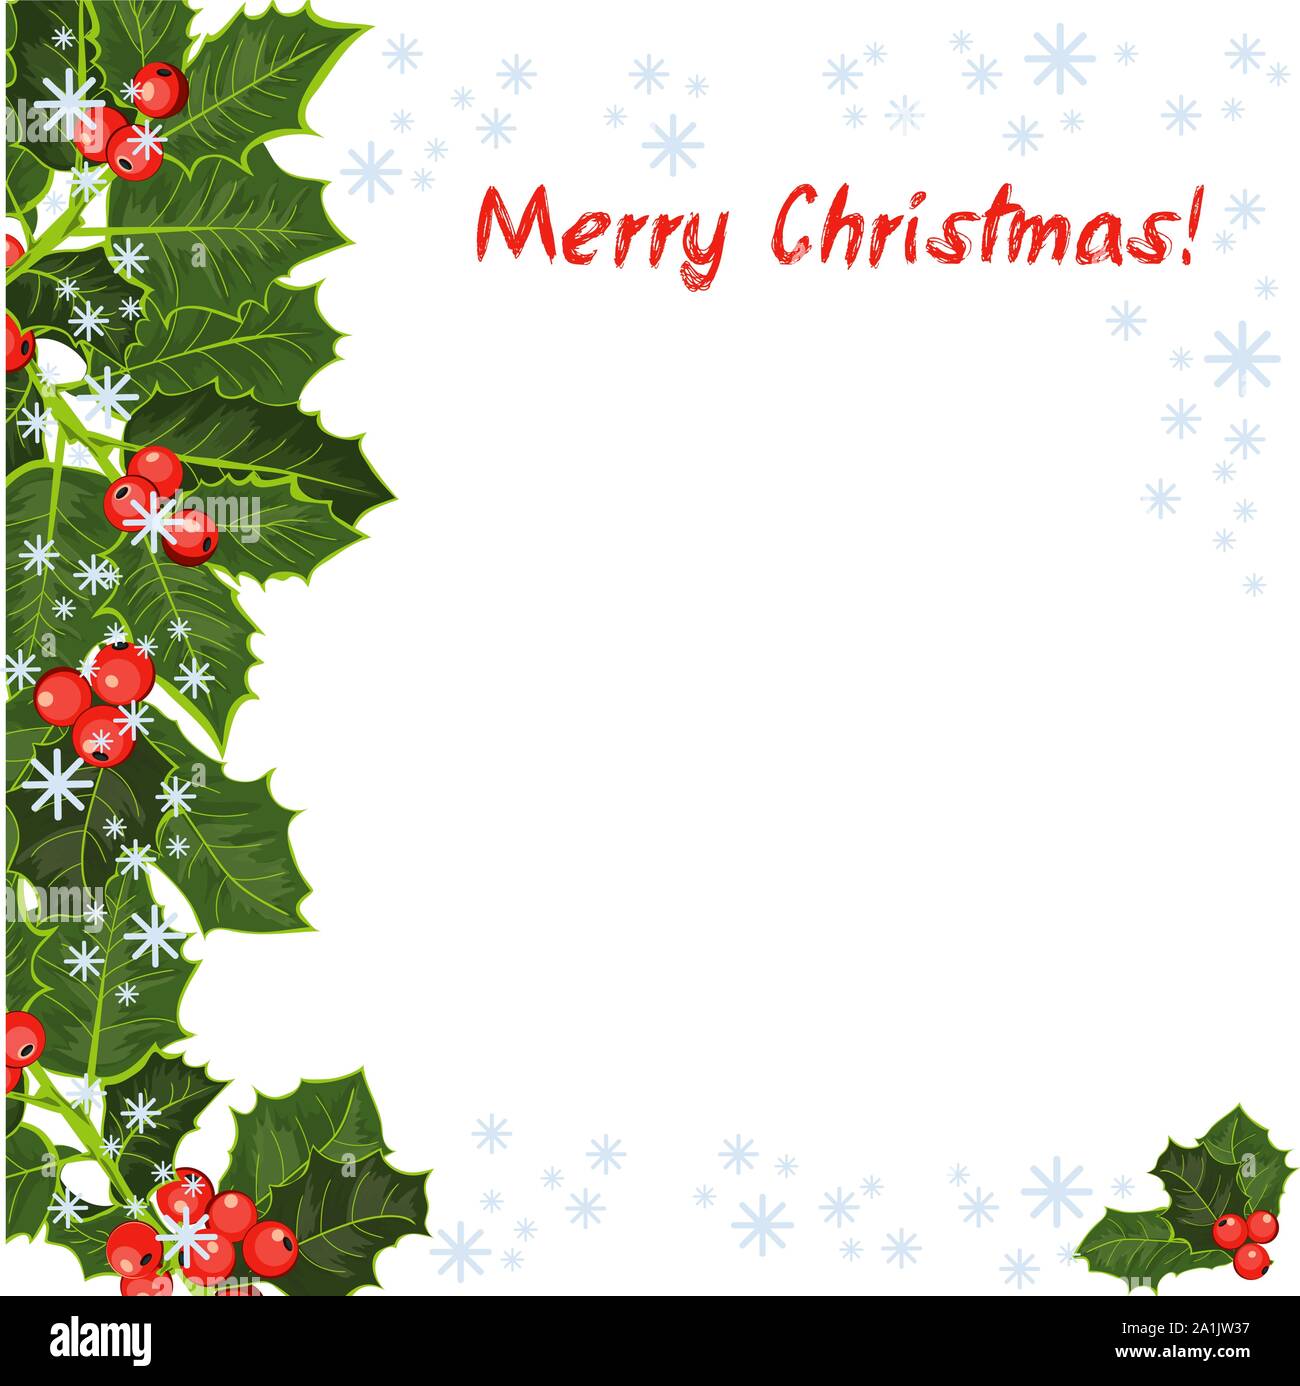 Merry Christmas card. Holly tree greeting cards template, winter ...